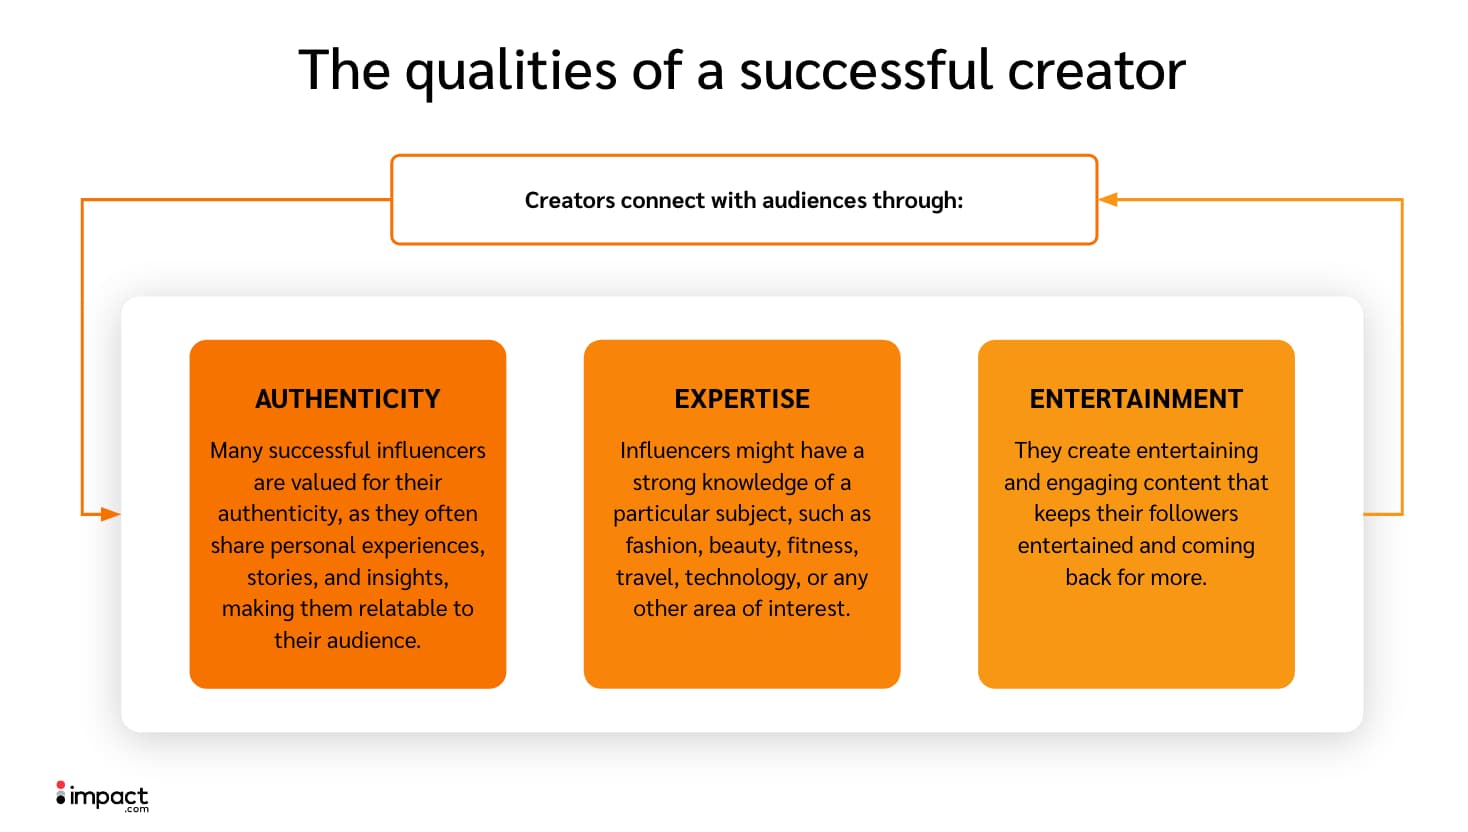 The qualities of a successful creator